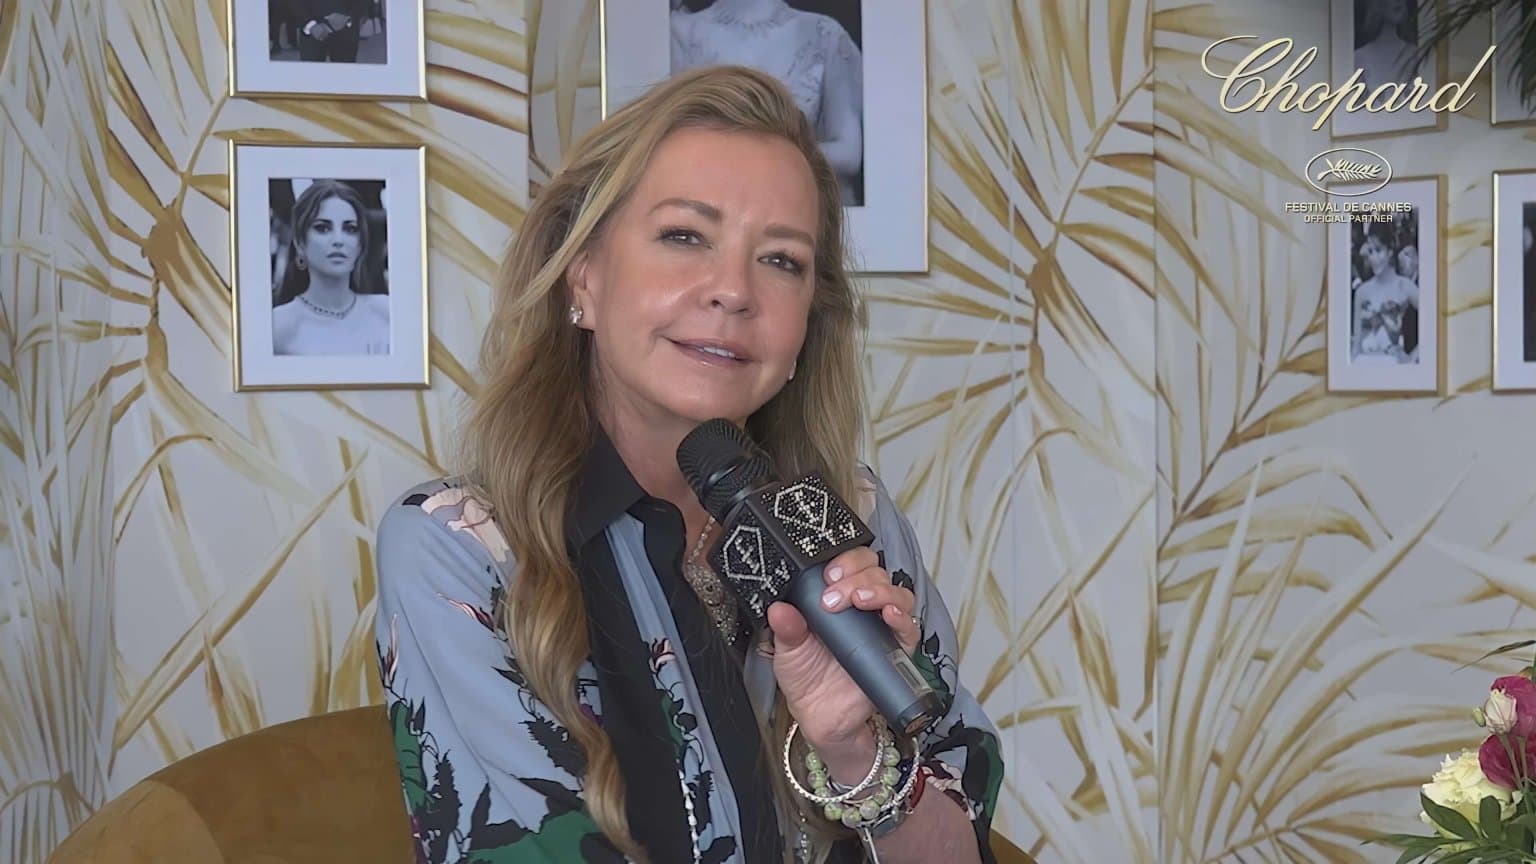 Interview with Caroline Scheufele, the President of Chopard for FashionTV at Cannes Film Festival 2022